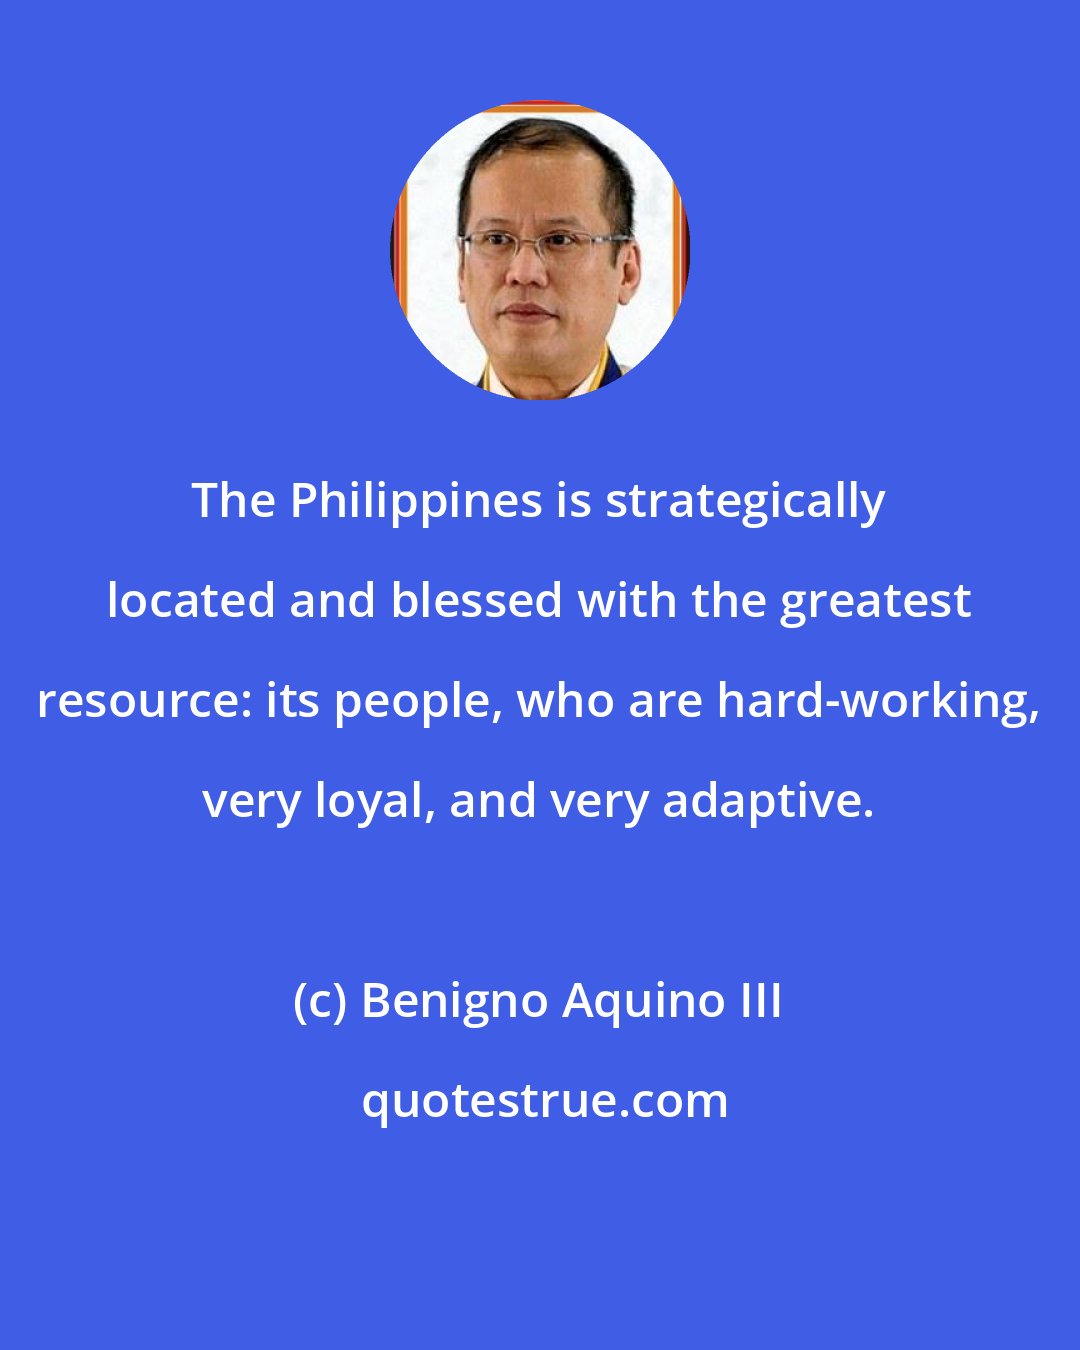 Benigno Aquino III: The Philippines is strategically located and blessed with the greatest resource: its people, who are hard-working, very loyal, and very adaptive.